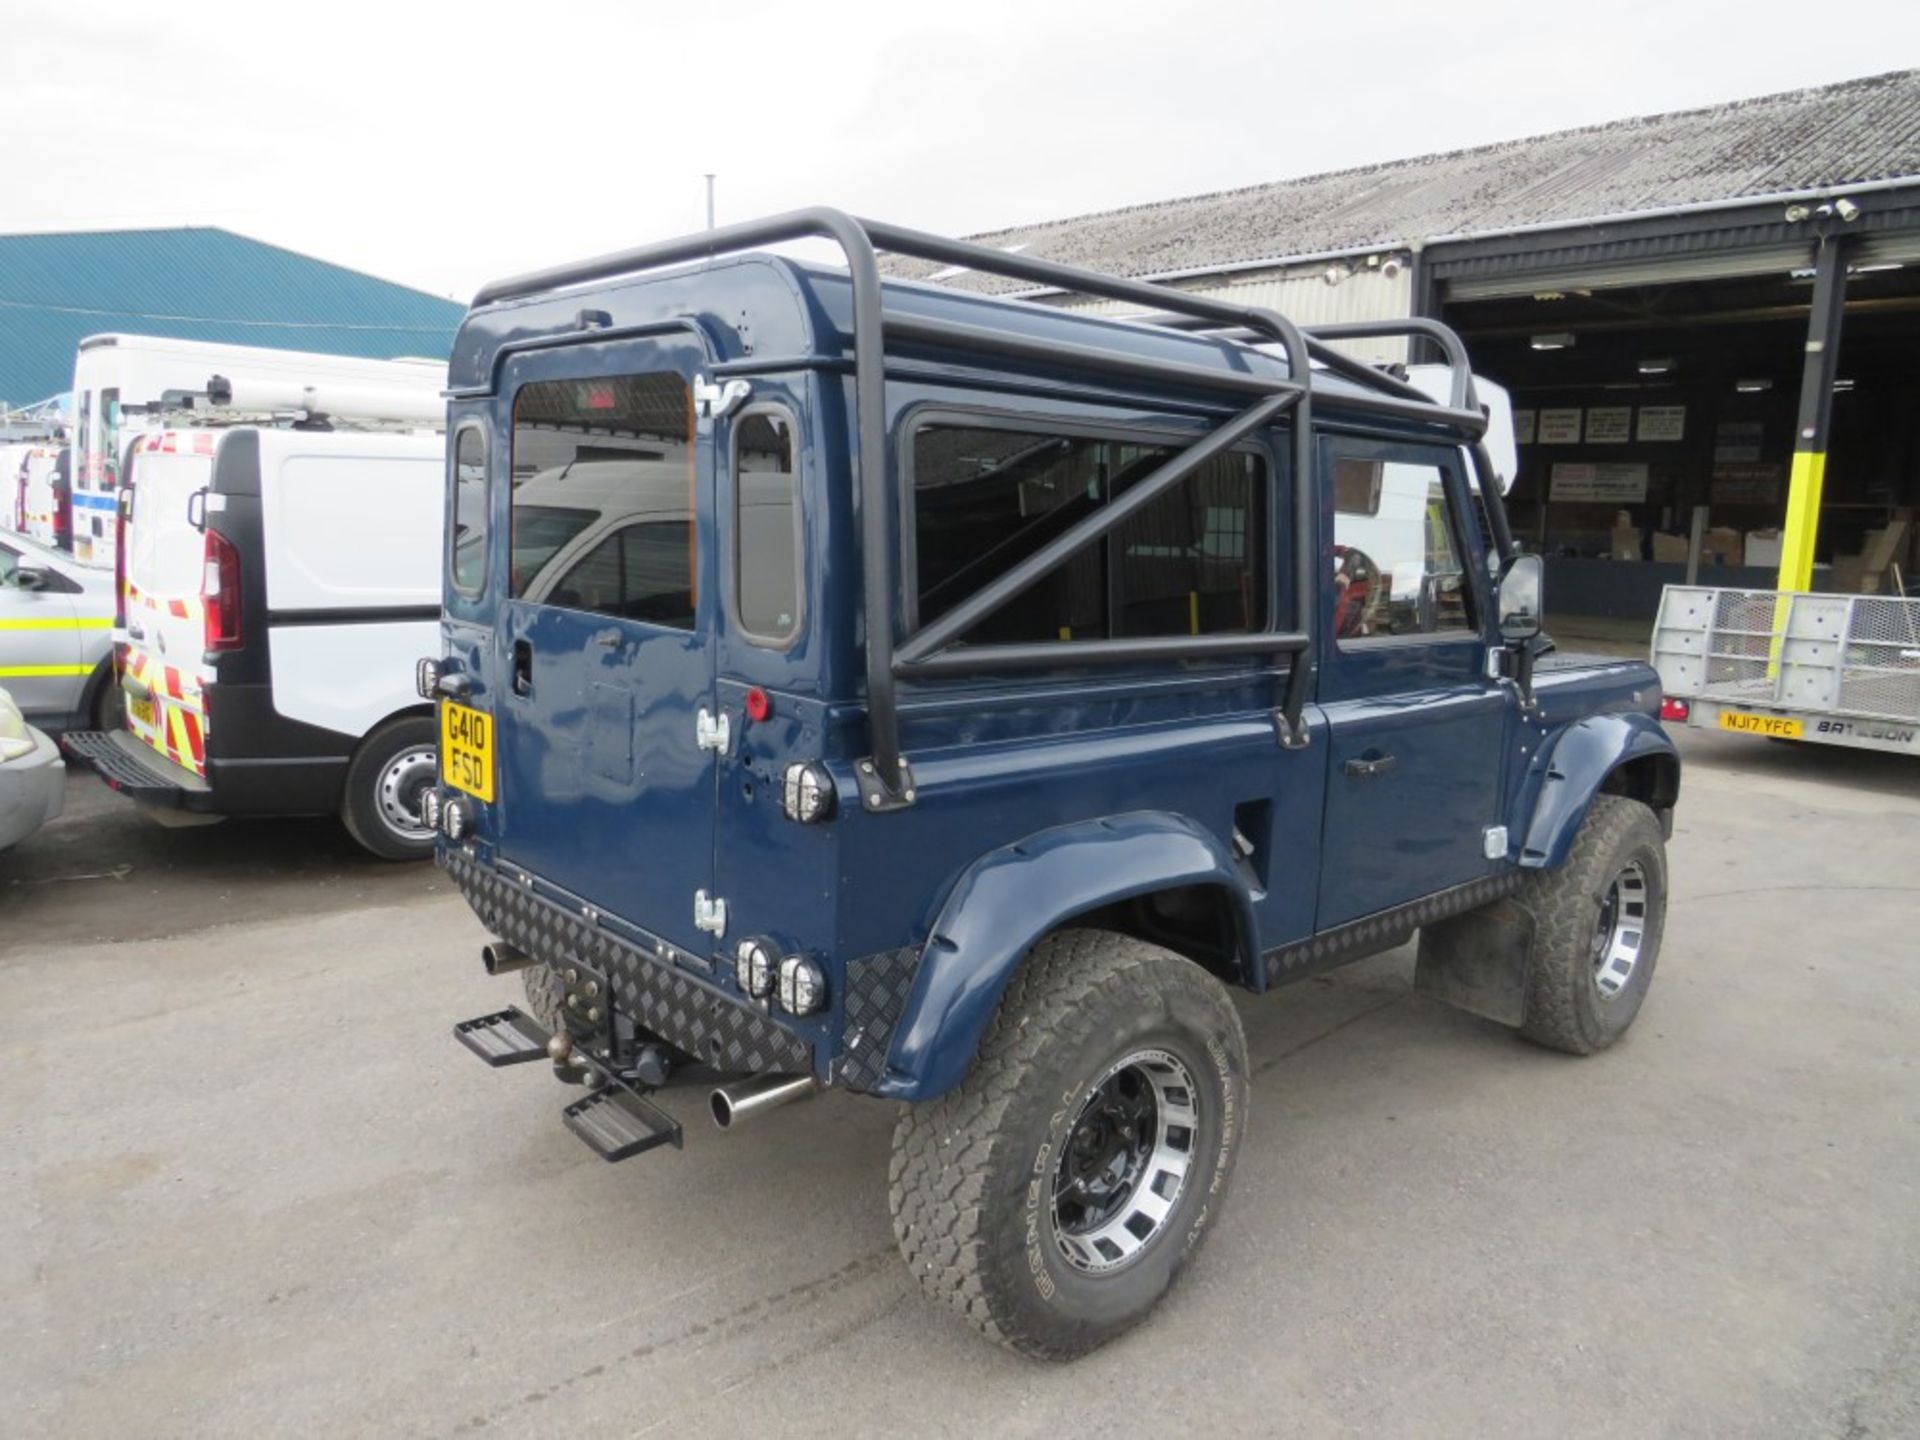 G reg LAND ROVER 90 4C SW DT DIESEL 4 X 4, NEW GLAV CHASSIS, 300 TDI ENGINE, 200 GEARBOX, NEW DOORS - Image 4 of 6